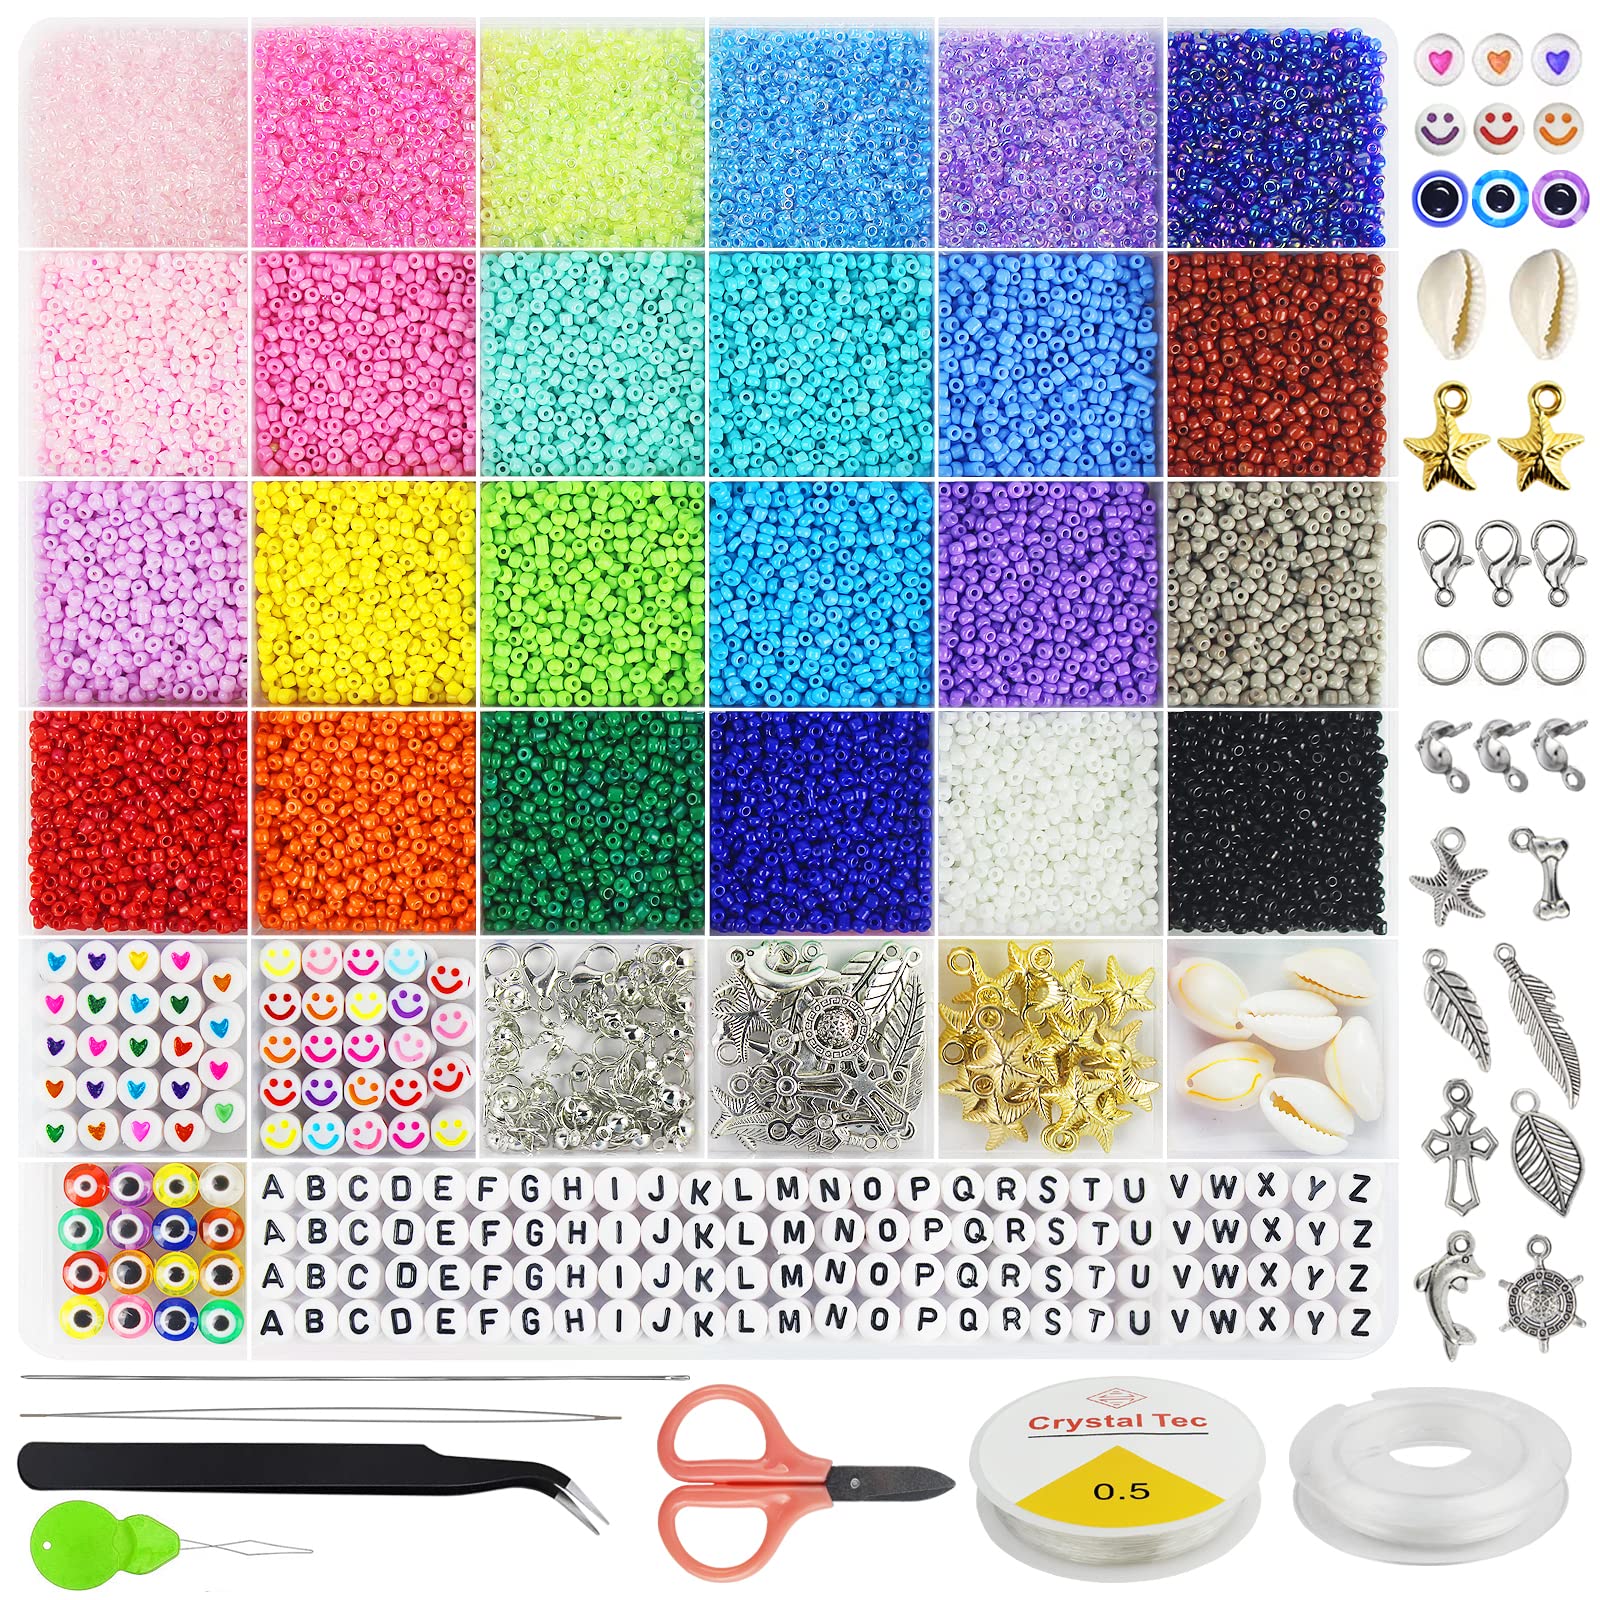 Redtwo 17000pcs 2mm Glass Seed Beads for Jewelry Making Kit Small Beads  Friendship Bracelets Making Kits Tiny Waist Beads Kit with Letter Evil Eye  Beads and Elastic String DIY Art Craft Gifts